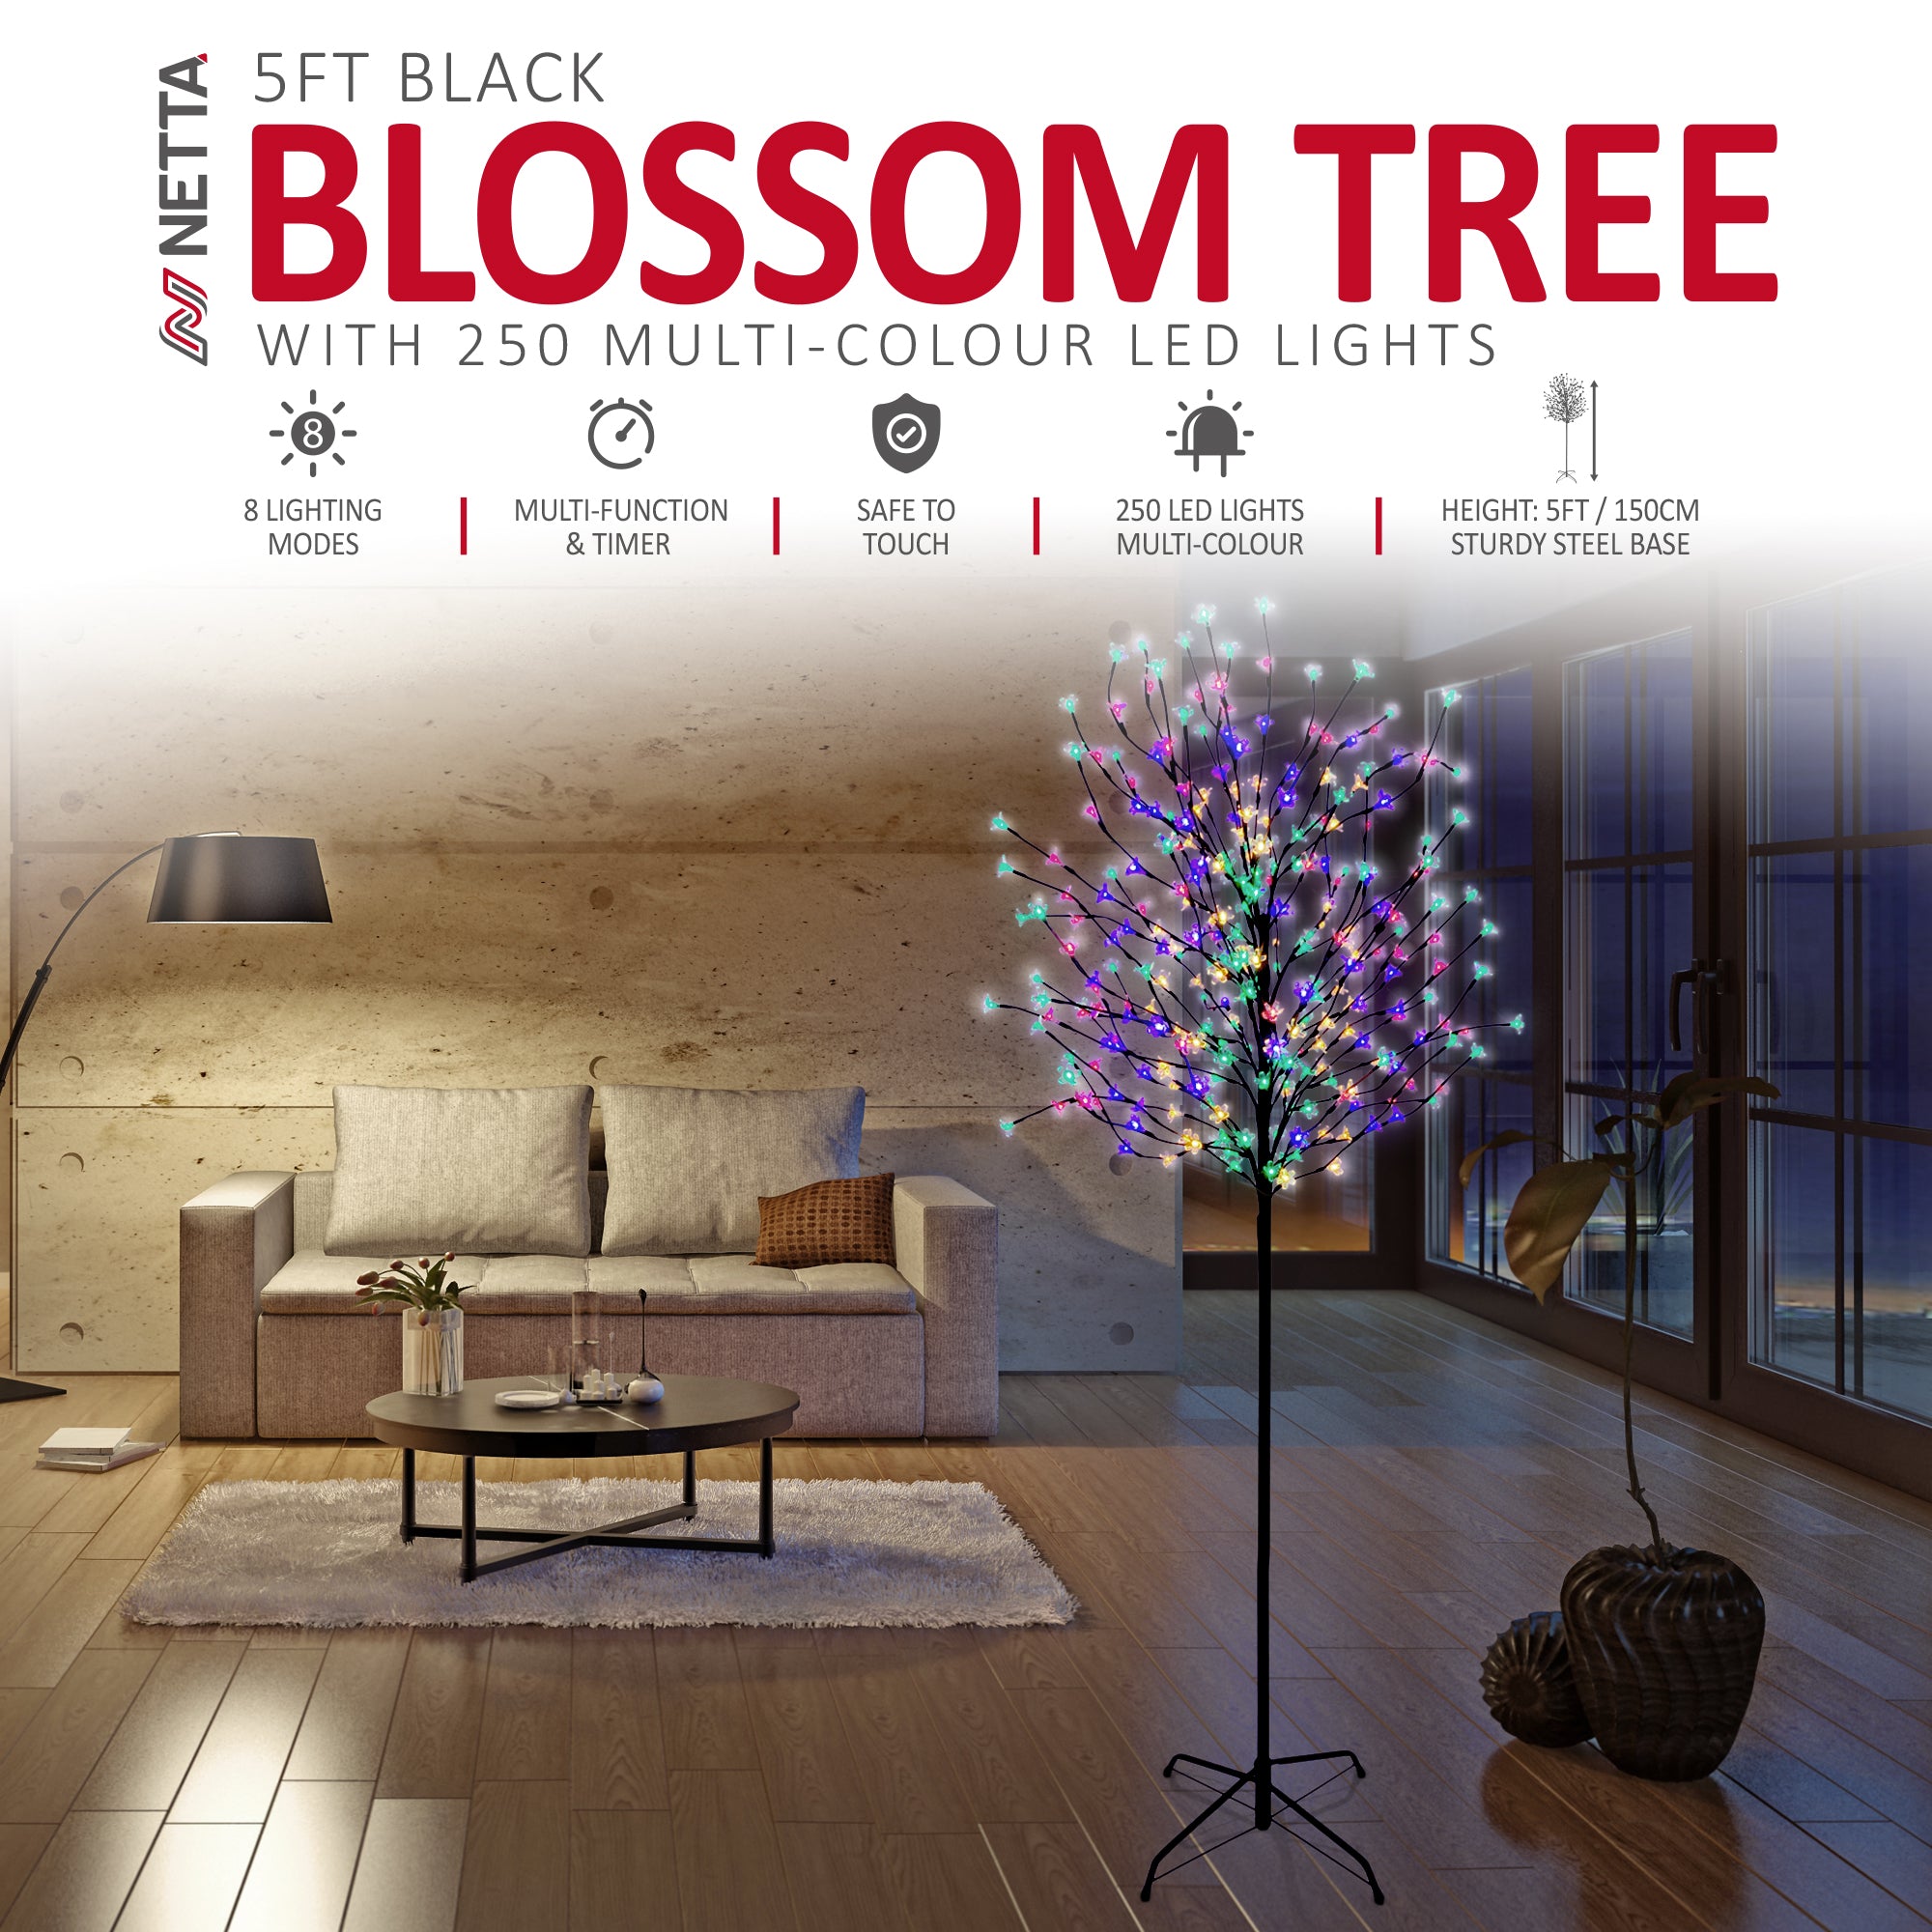 NETTA 5FT LED Cherry Blossom Tree, 250 Pre-Lit Lights, Auto-Off Timer and 8 Lighting Modes, 3M Power Cable, Suitable for Indoor and Outdoor Use - Multi-Colour